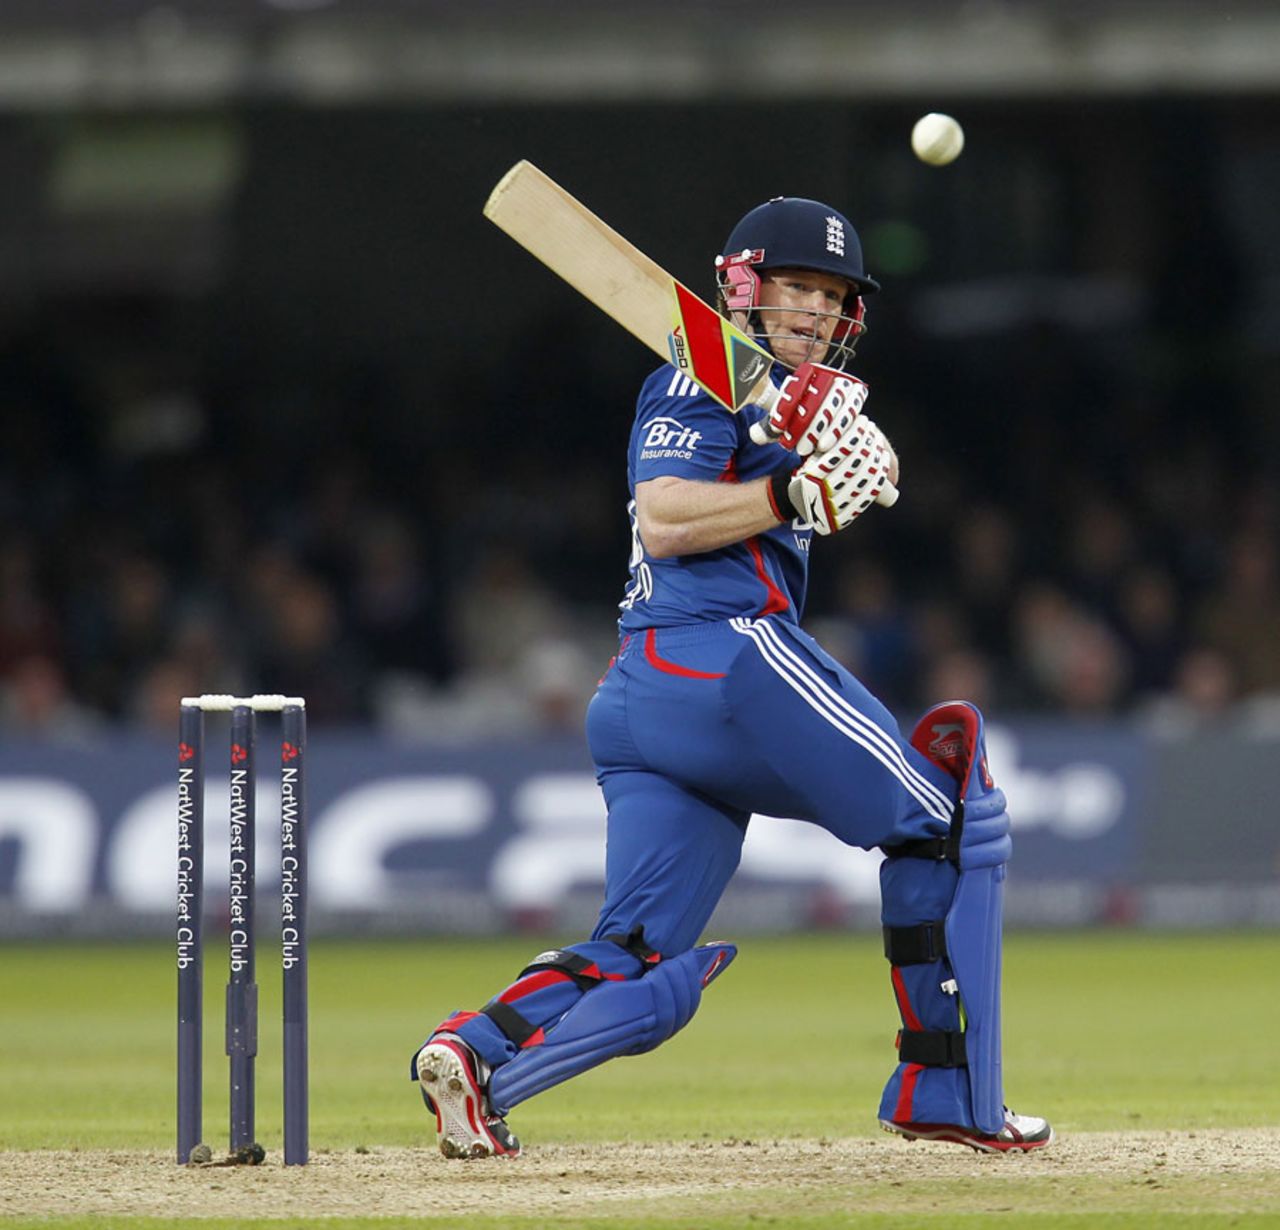 Eoin Morgan came out and played his typical breezy innings, England v South Africa, 4th ODI, Lord's, September 2, 2012